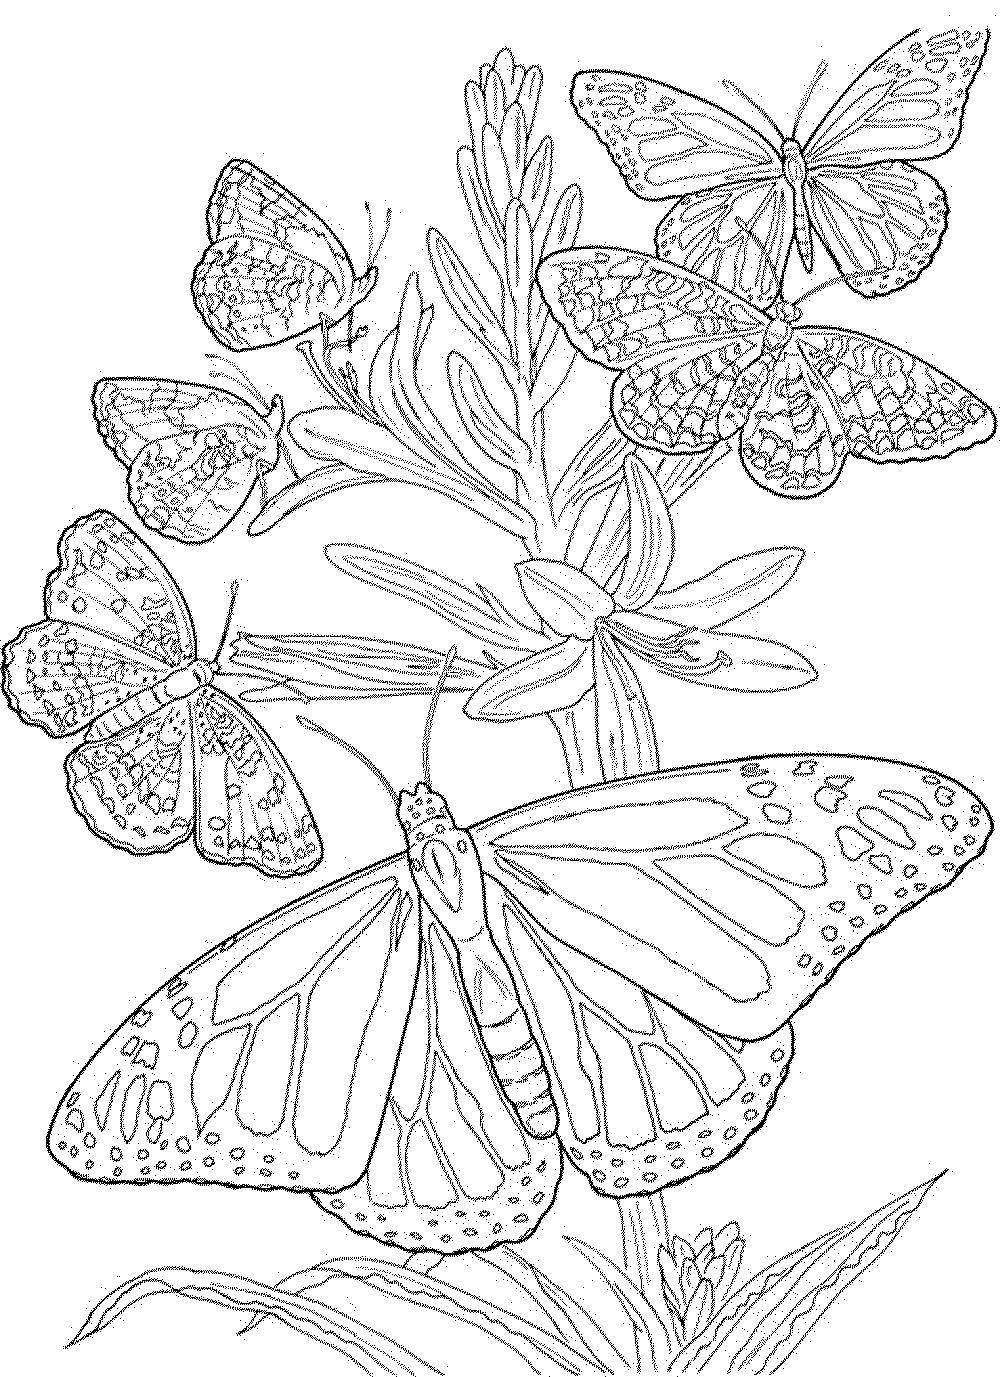 Coloring Many butterflies among the flowers. Category butterflies. Tags:  Butterfly, flowers.